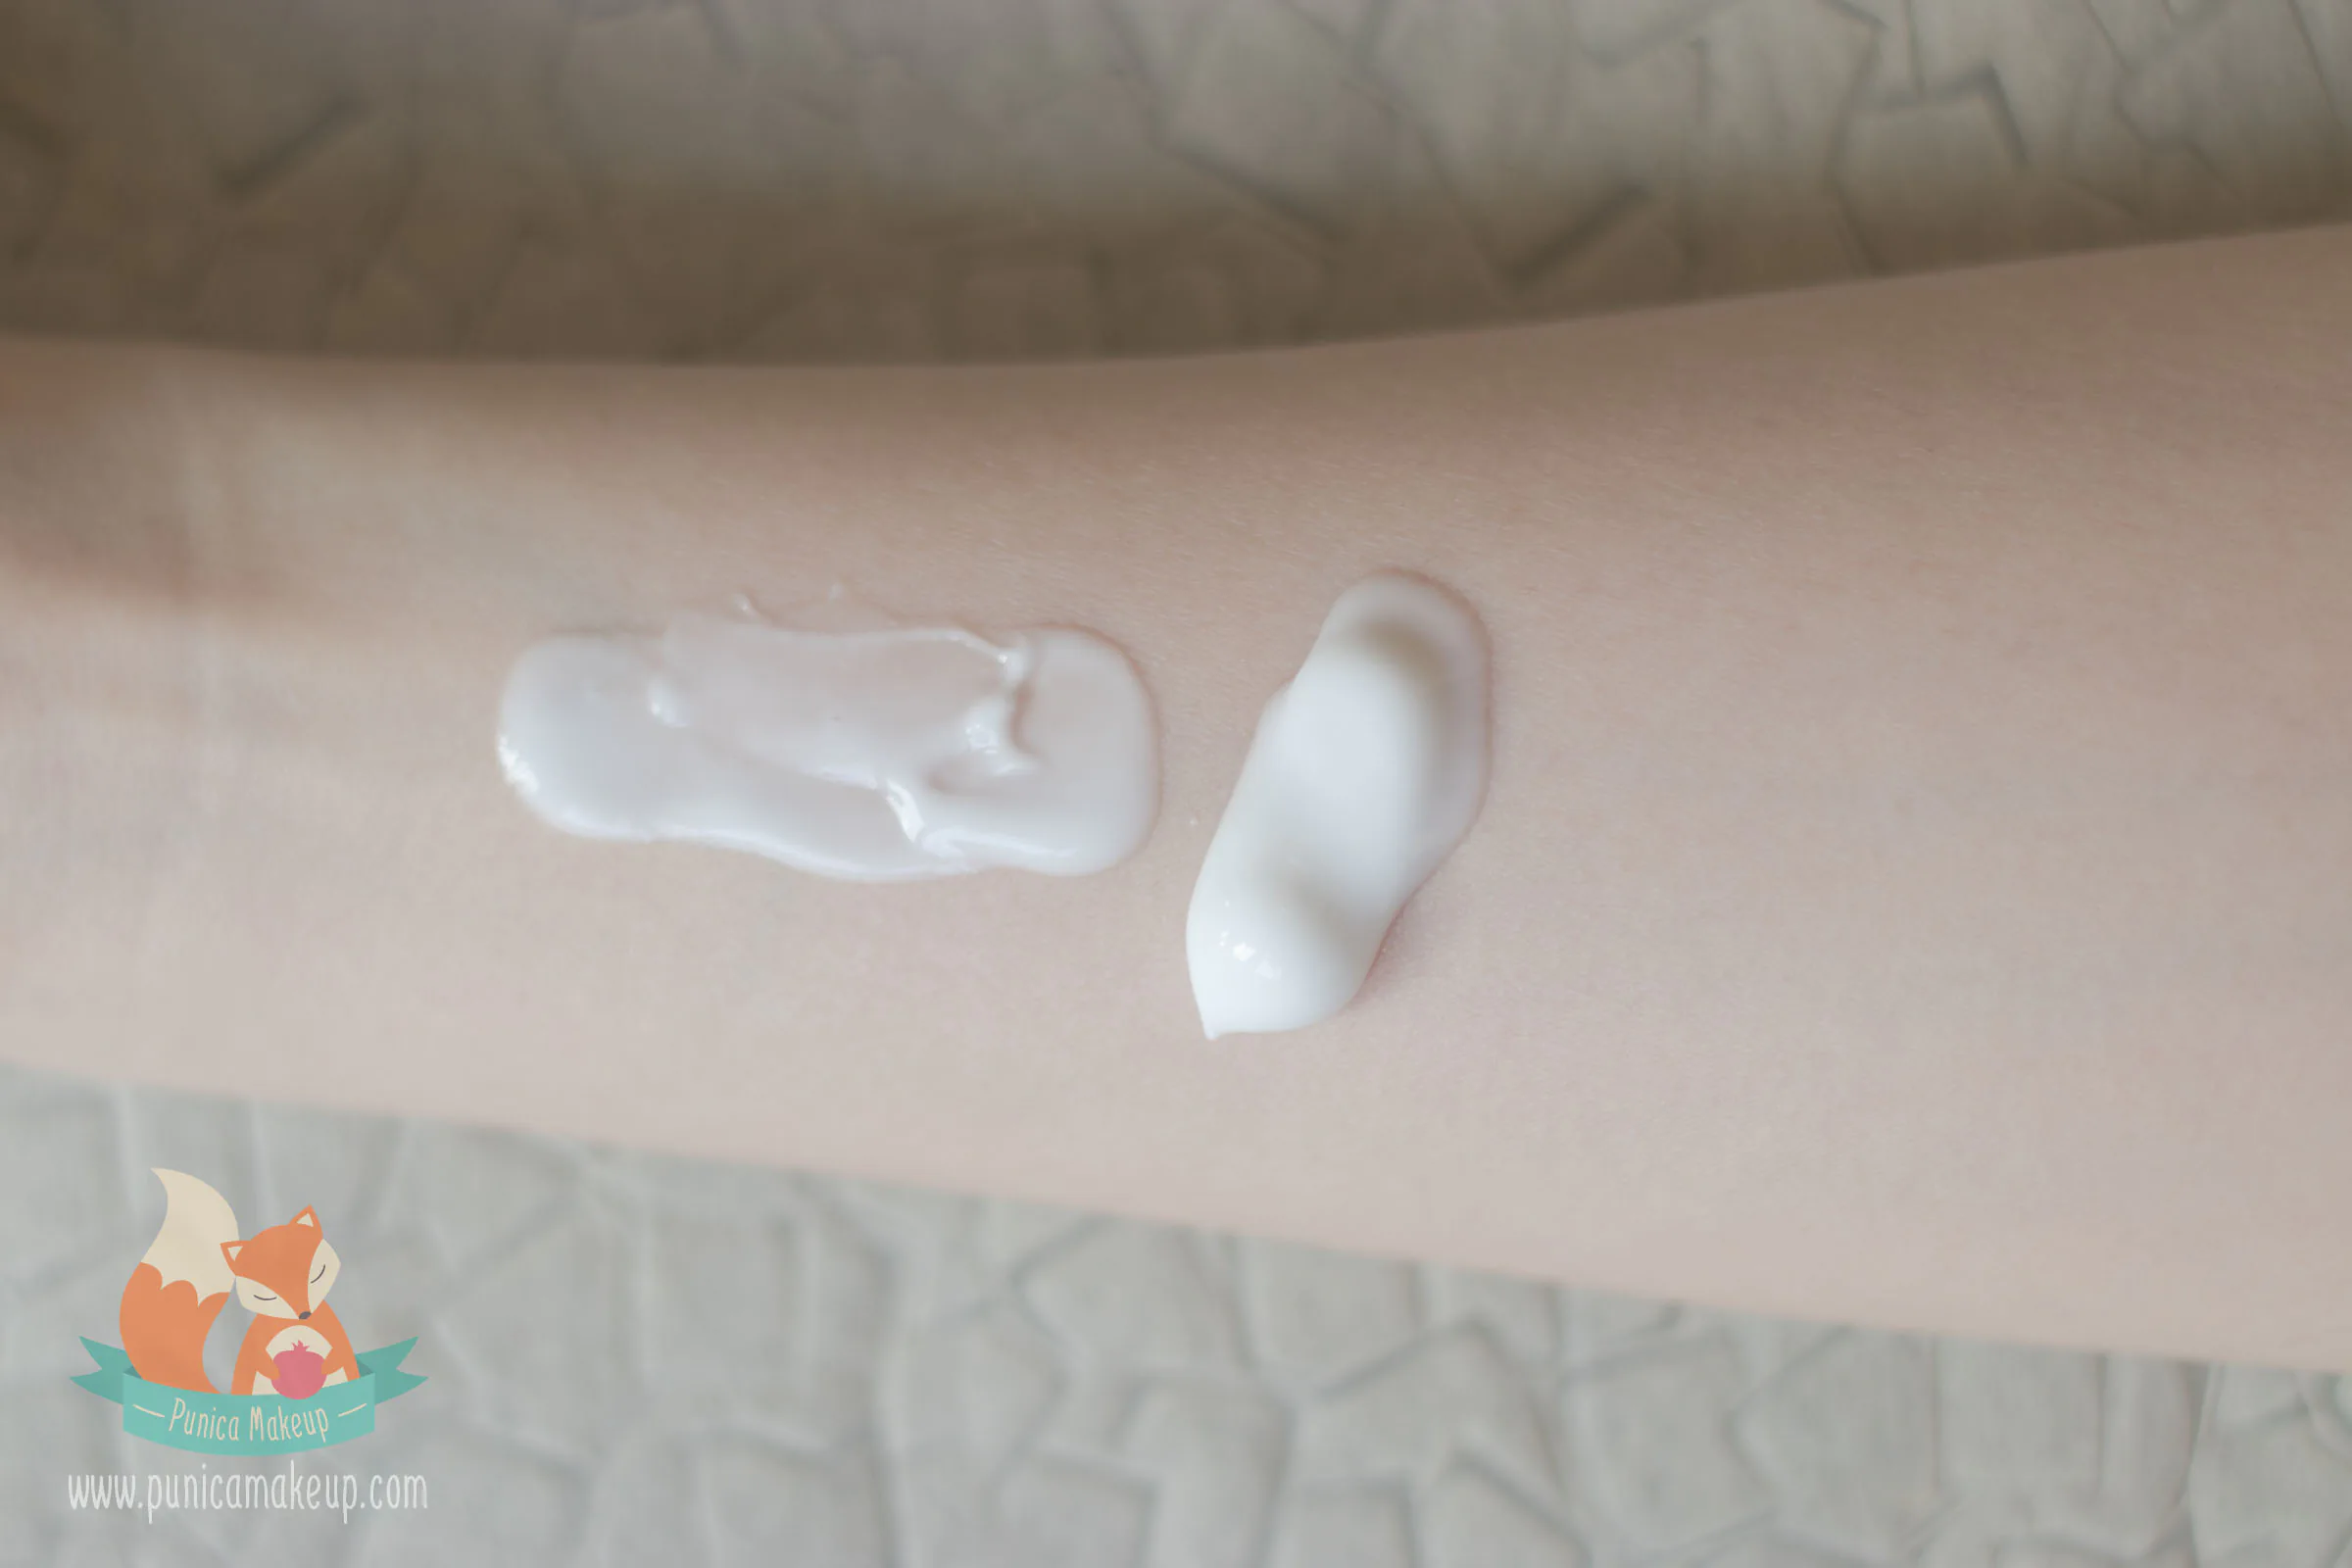 The Body Shop Vitamin E Cream Cleanser tested on my hand